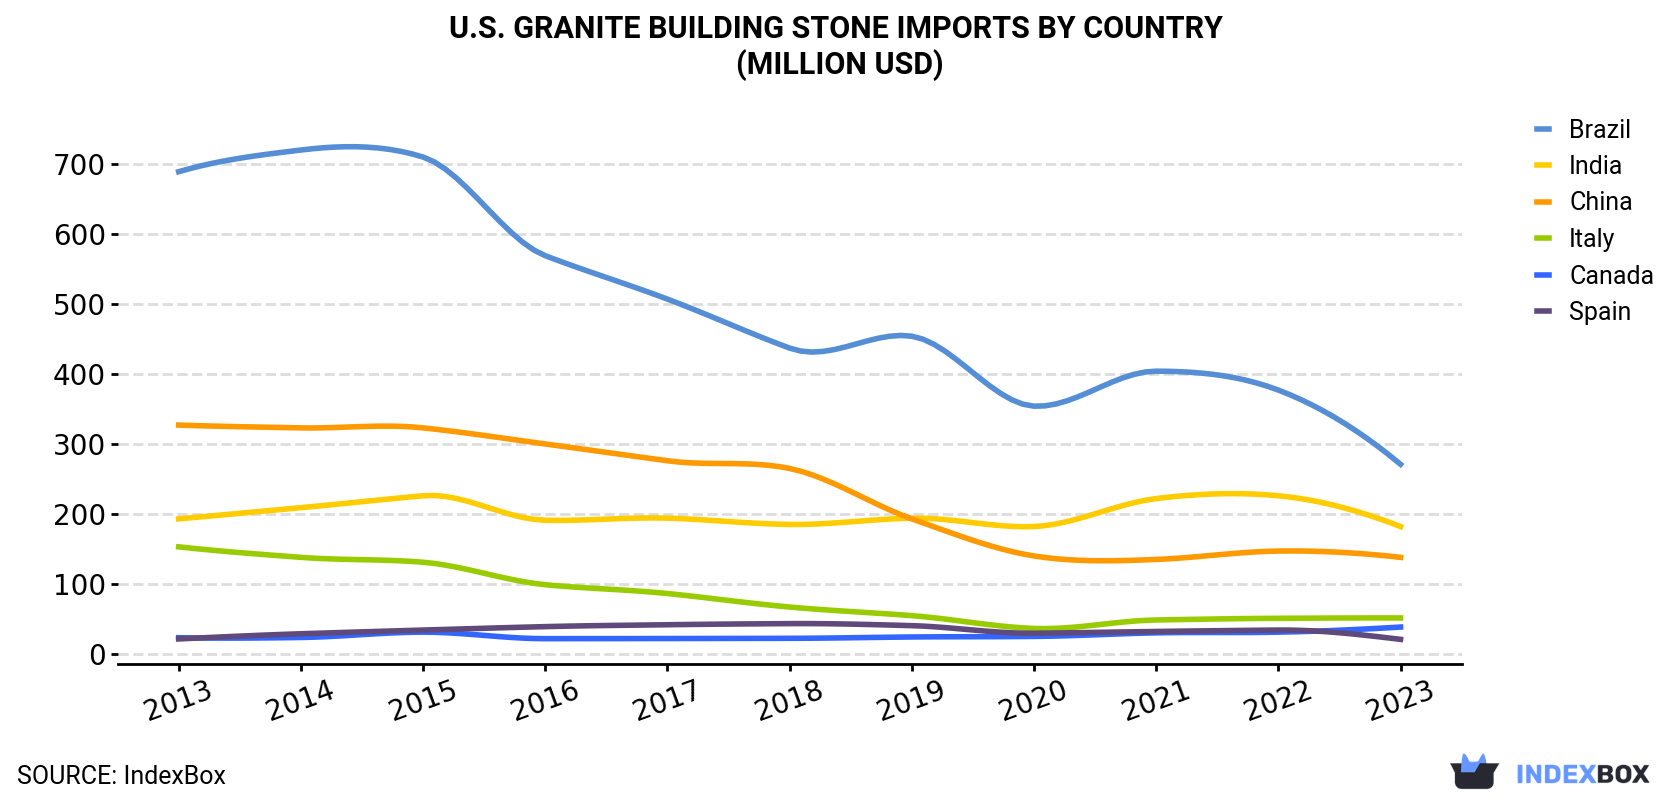 U.S. Granite Building Stone Imports By Country (Million USD)